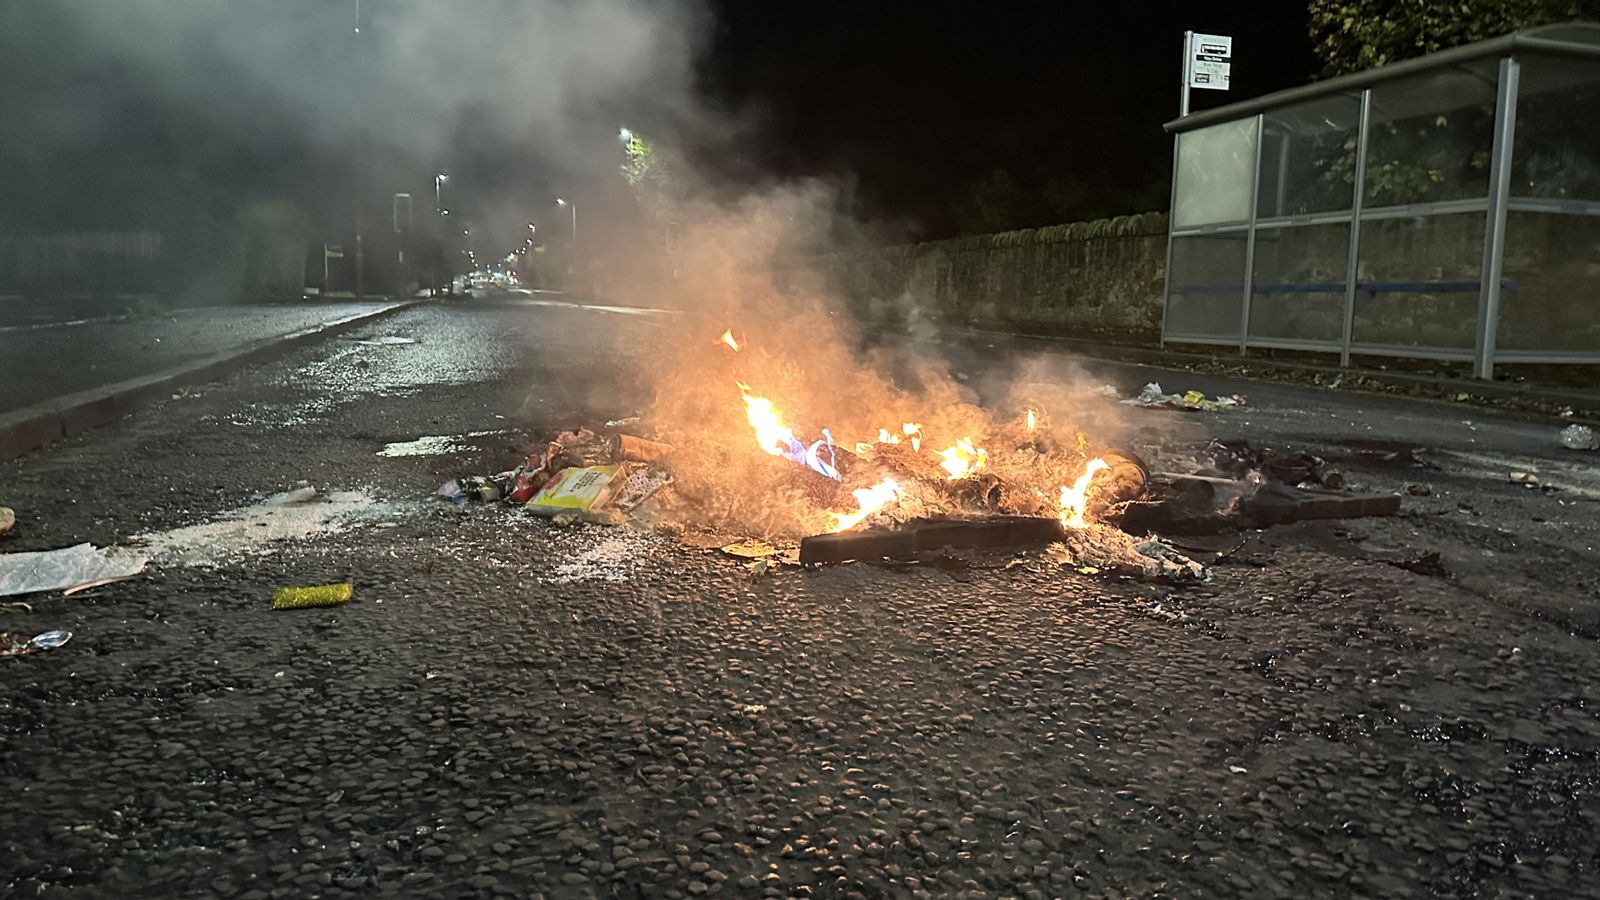 Teenager dies after fireworks 'hurled' down street - as violence mars Bonfire Night in parts of UK